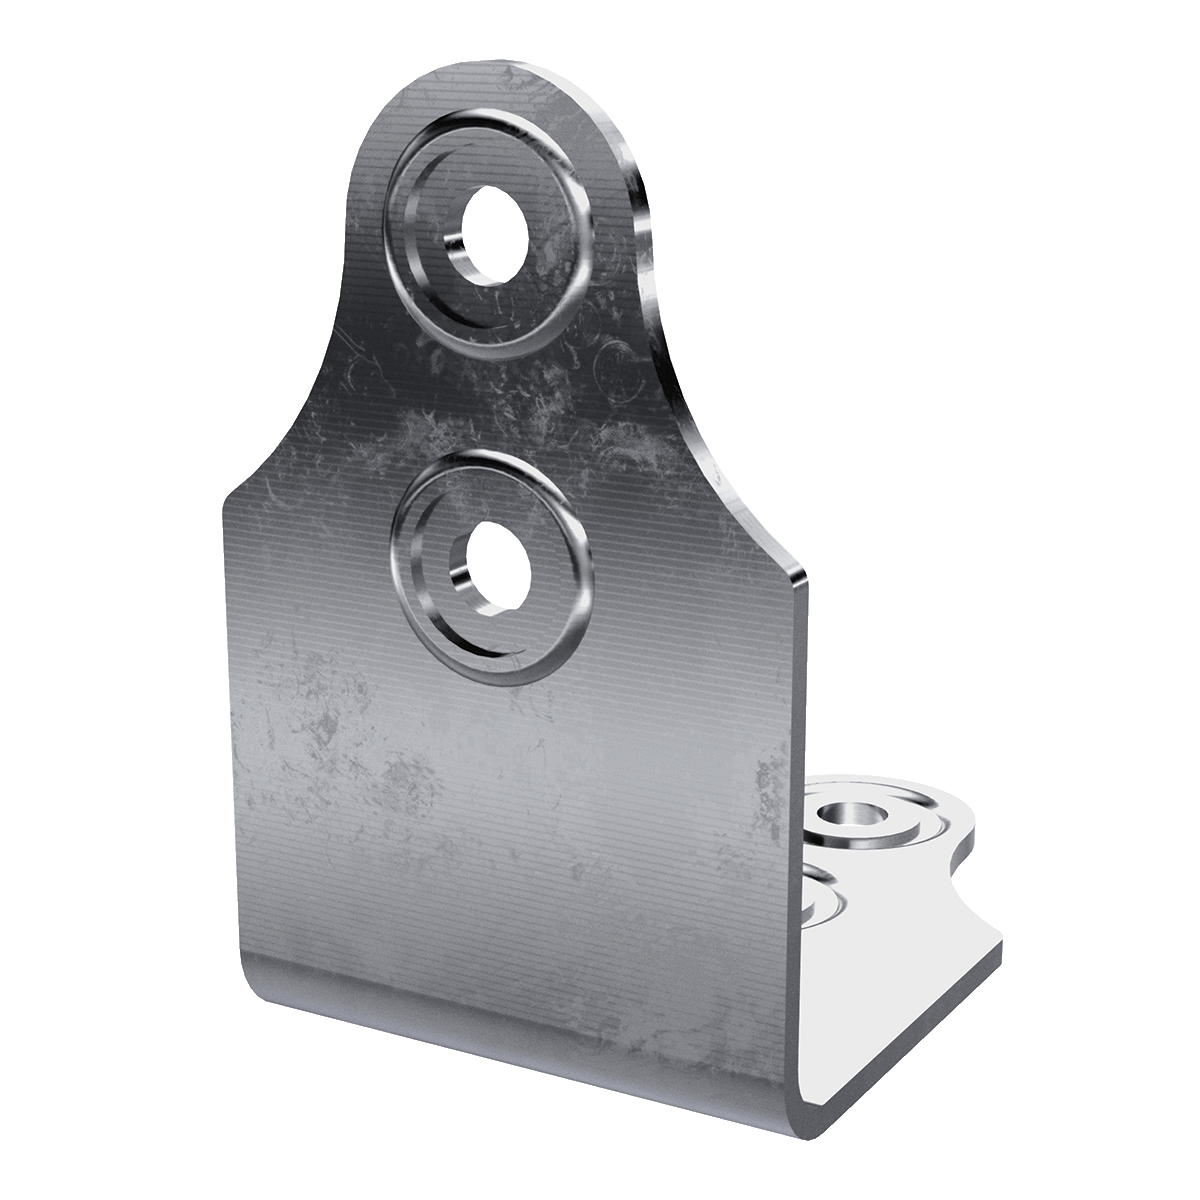 Four-Hole Clamp With Rivet Protectors